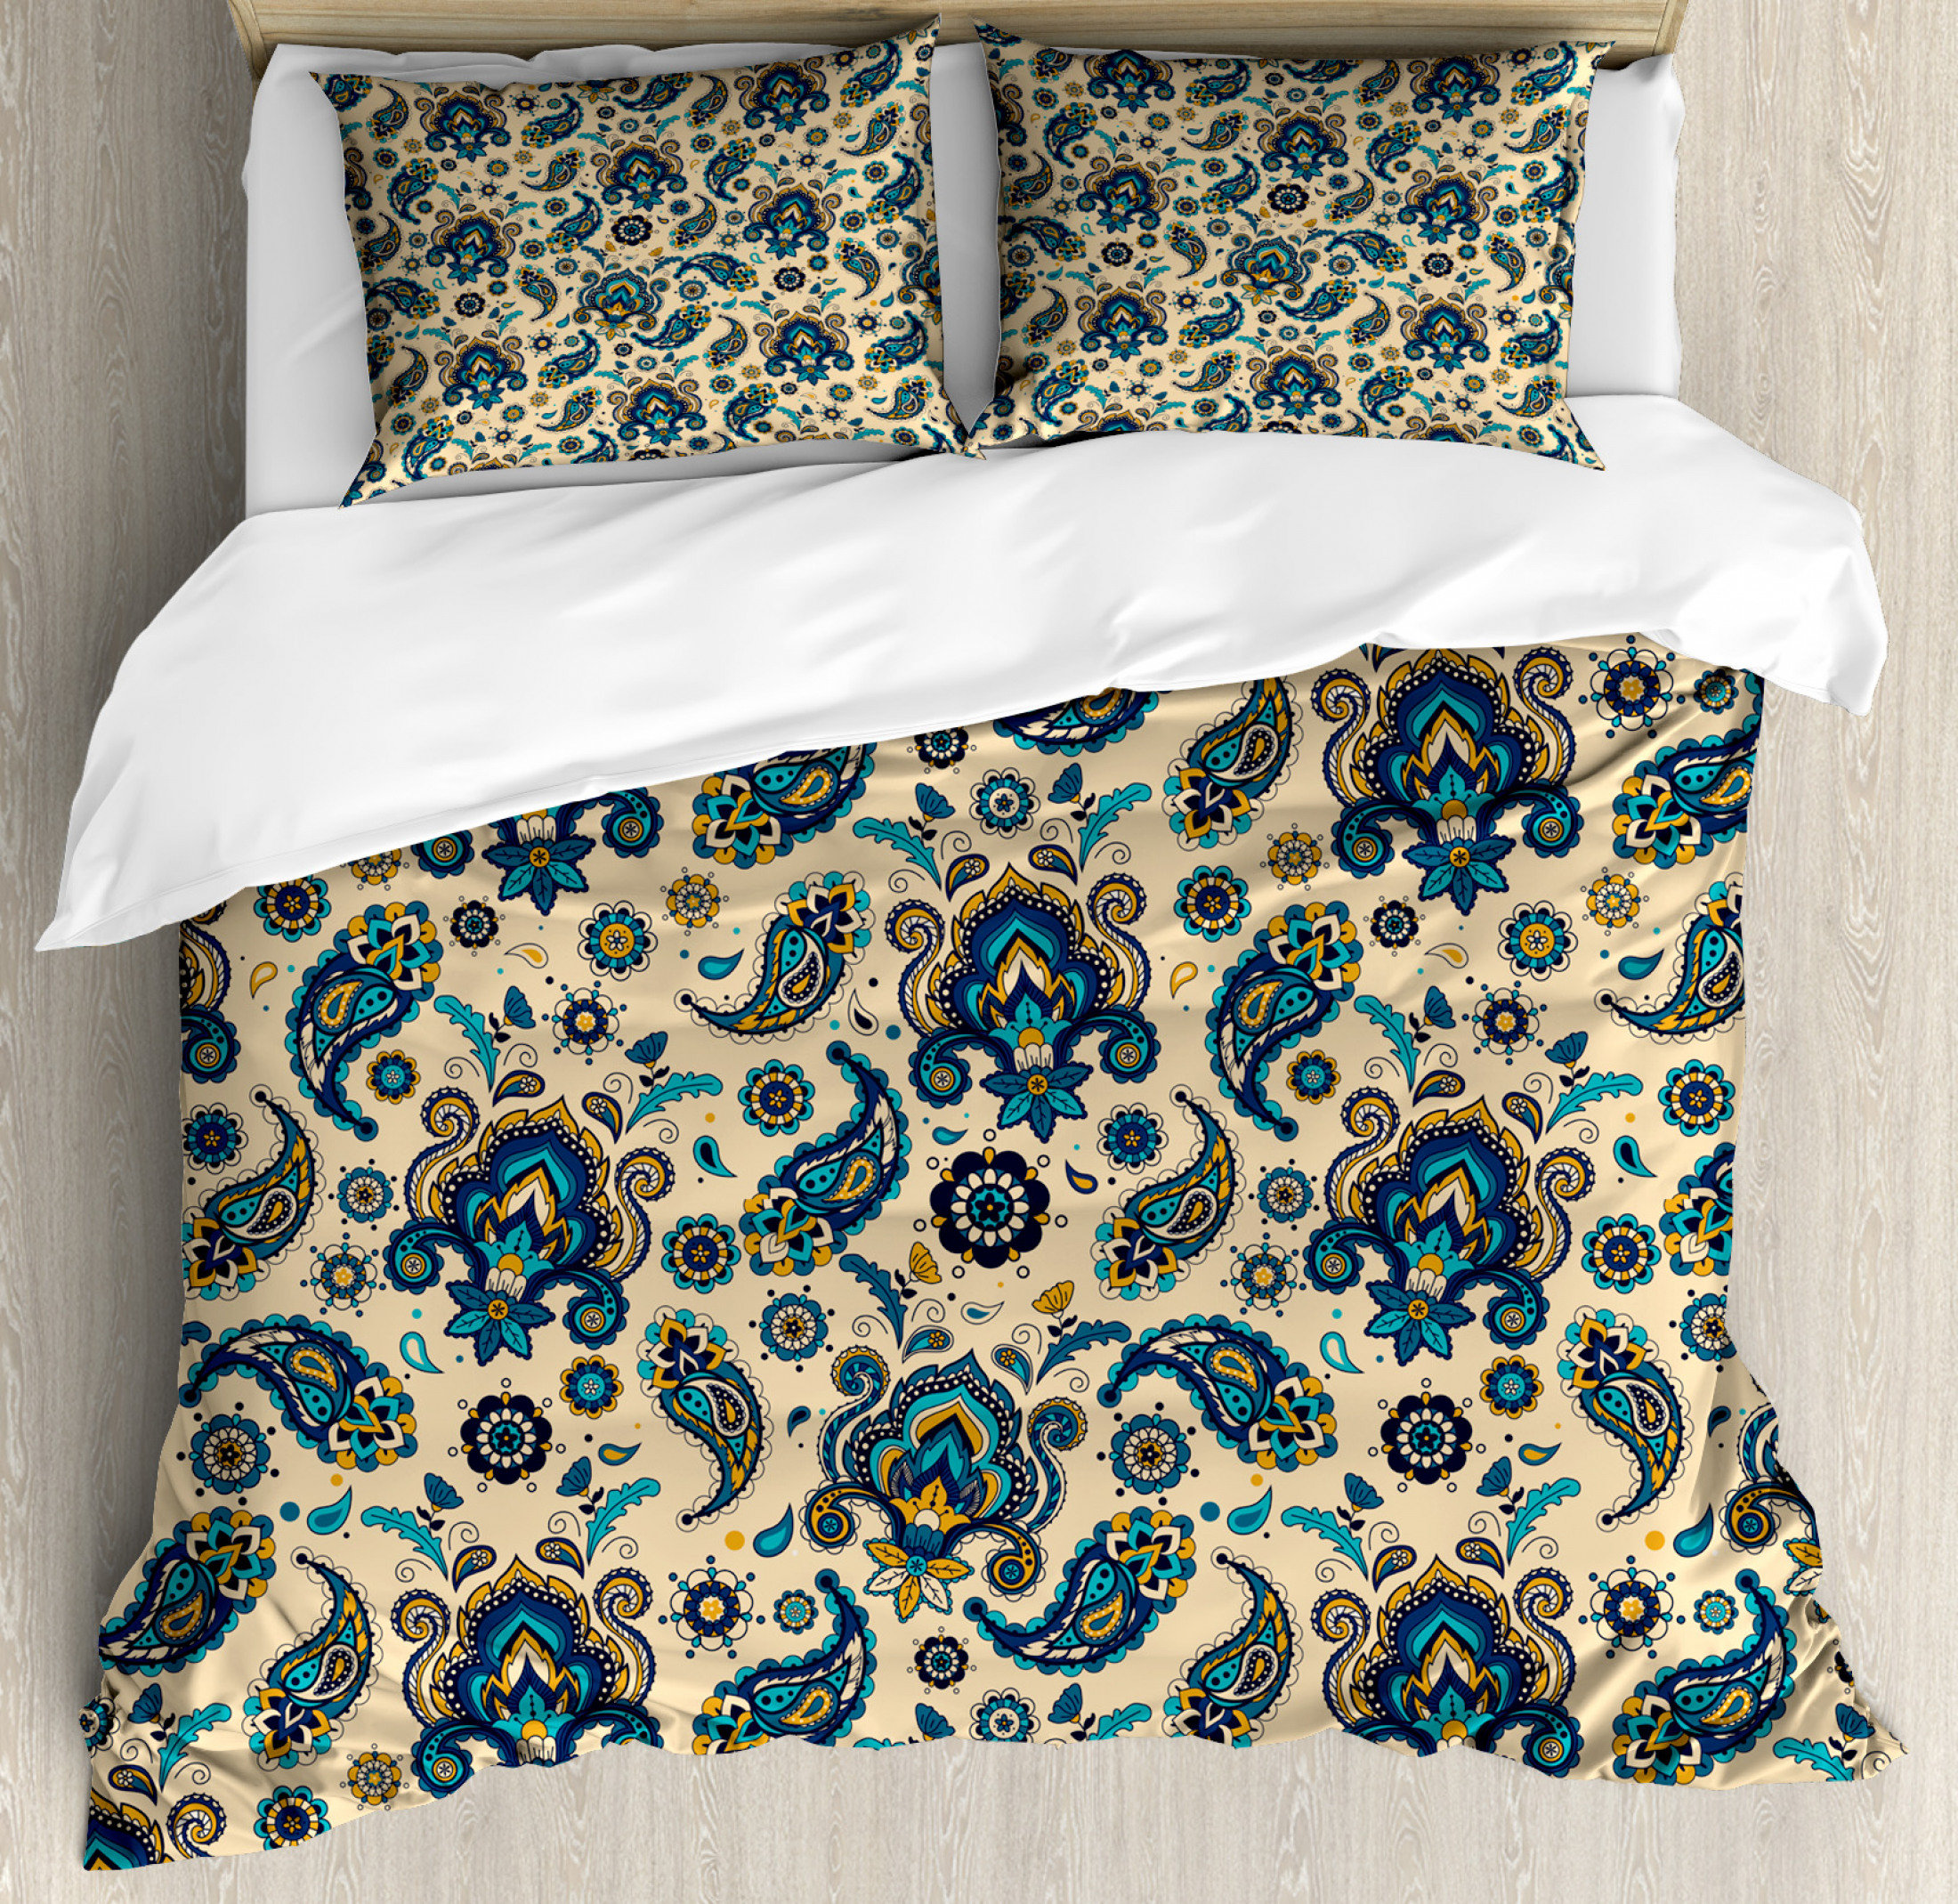 East Urban Home Ambesonne Paisley Duvet Cover Set Colourful